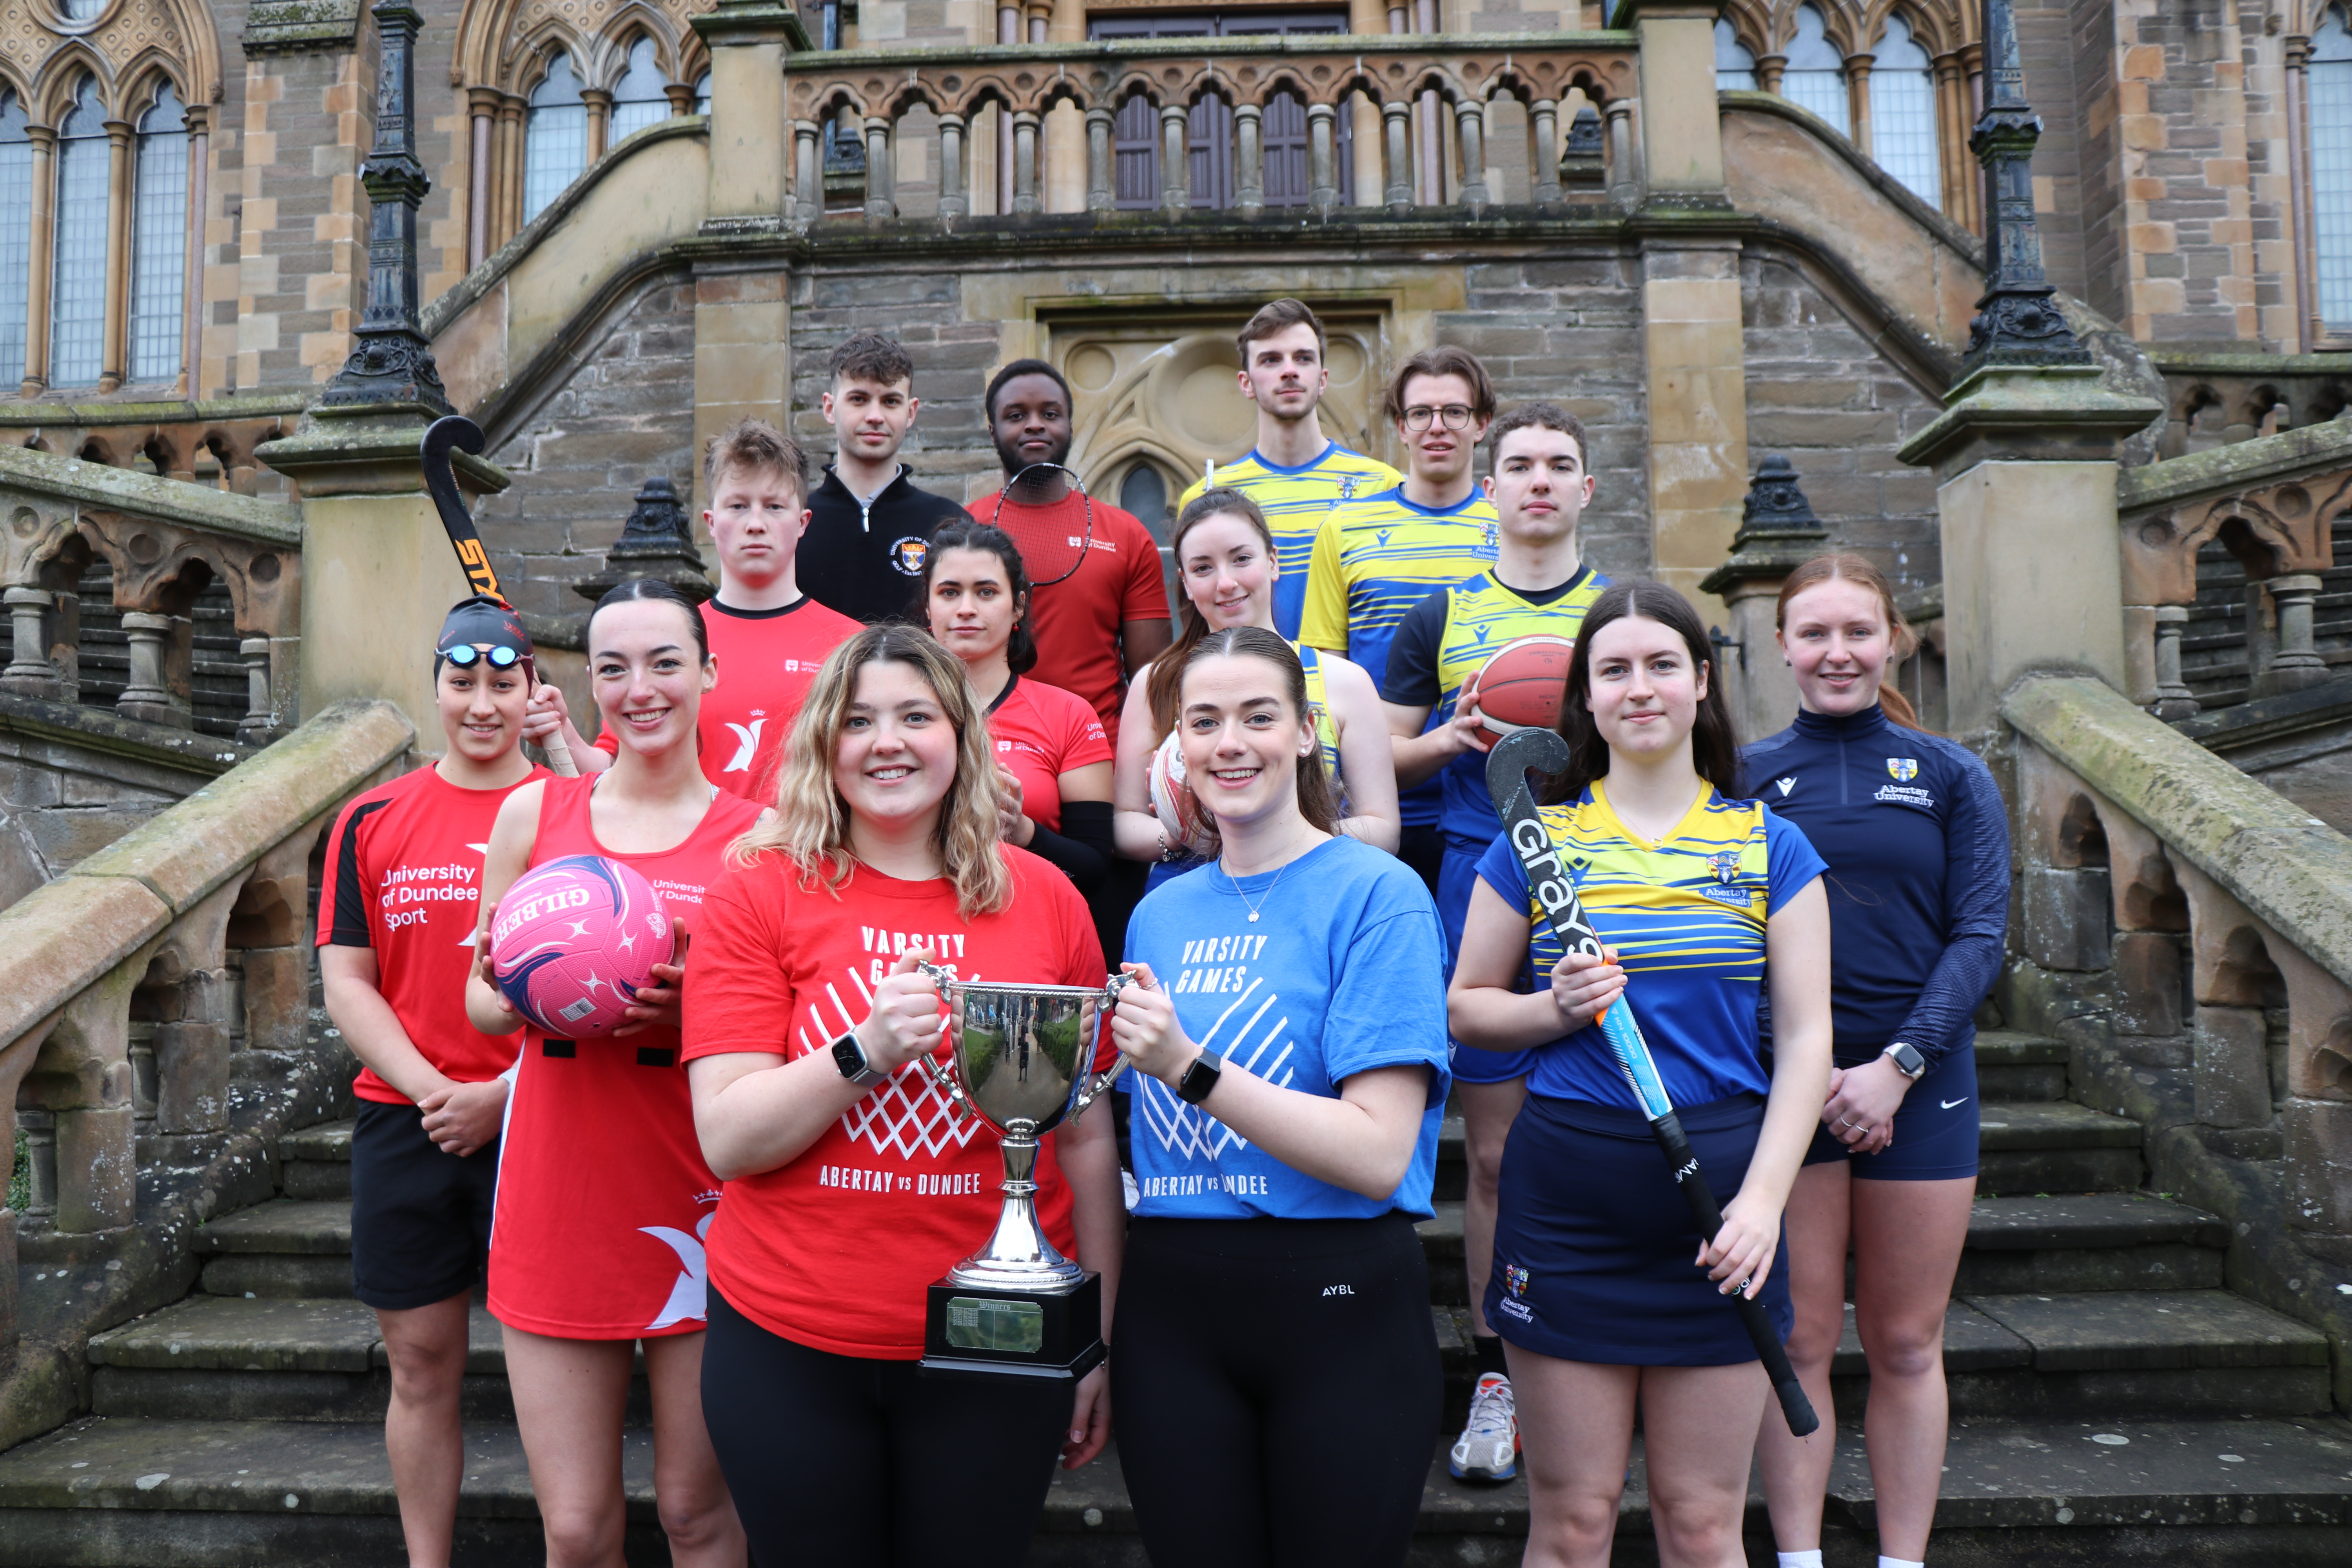 Sports teams from Dundee's two universities prepare to go head-to-head for the Varsity trophy